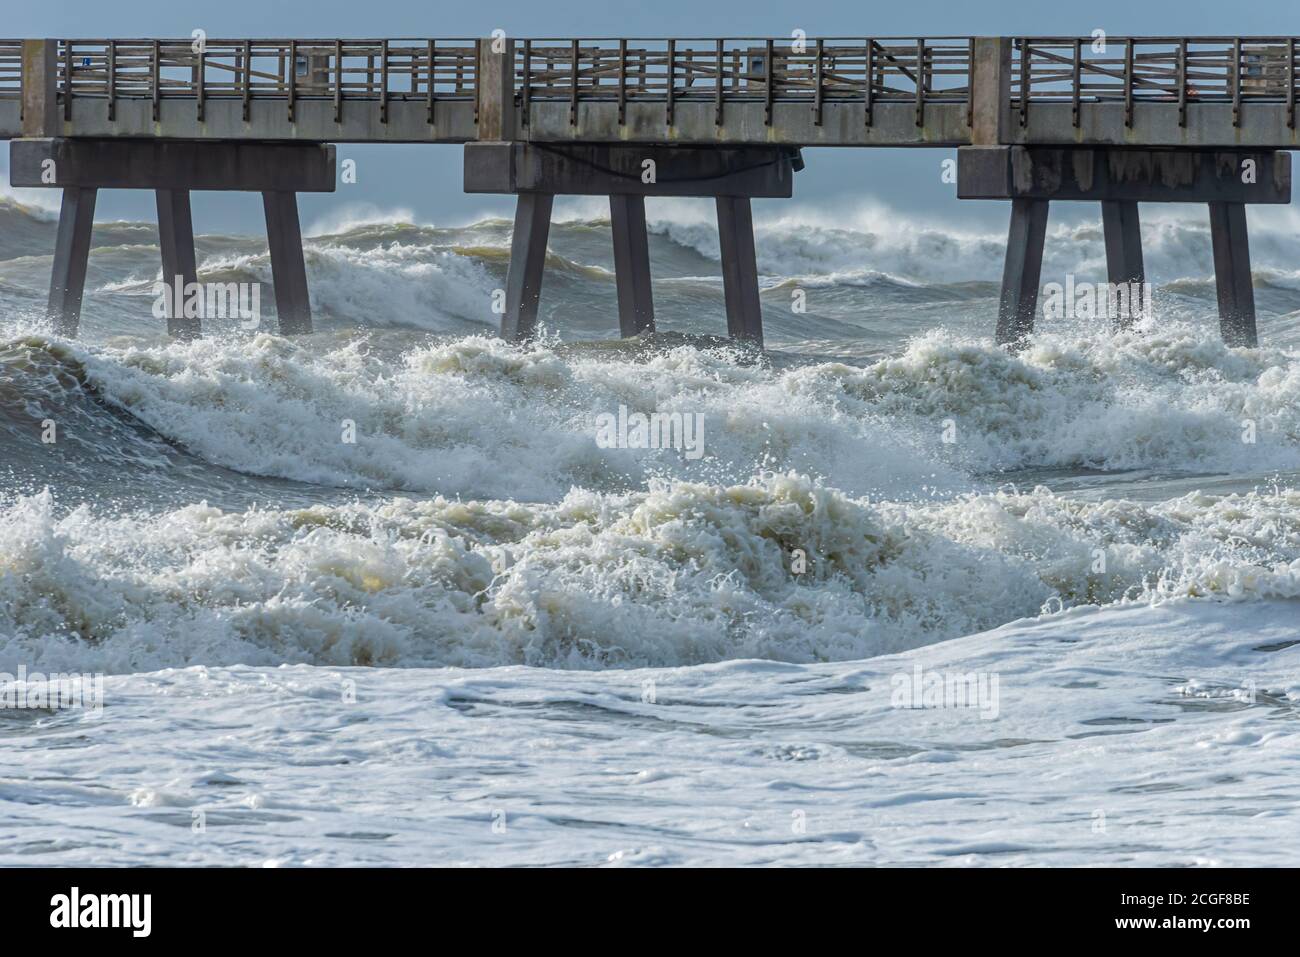 https://c8.alamy.com/comp/2CGF8BE/heavy-surf-at-jacksonville-beach-florida-as-tropical-storm-isaias-shortly-later-hurricane-isaias-passes-by-offshore-usa-2CGF8BE.jpg